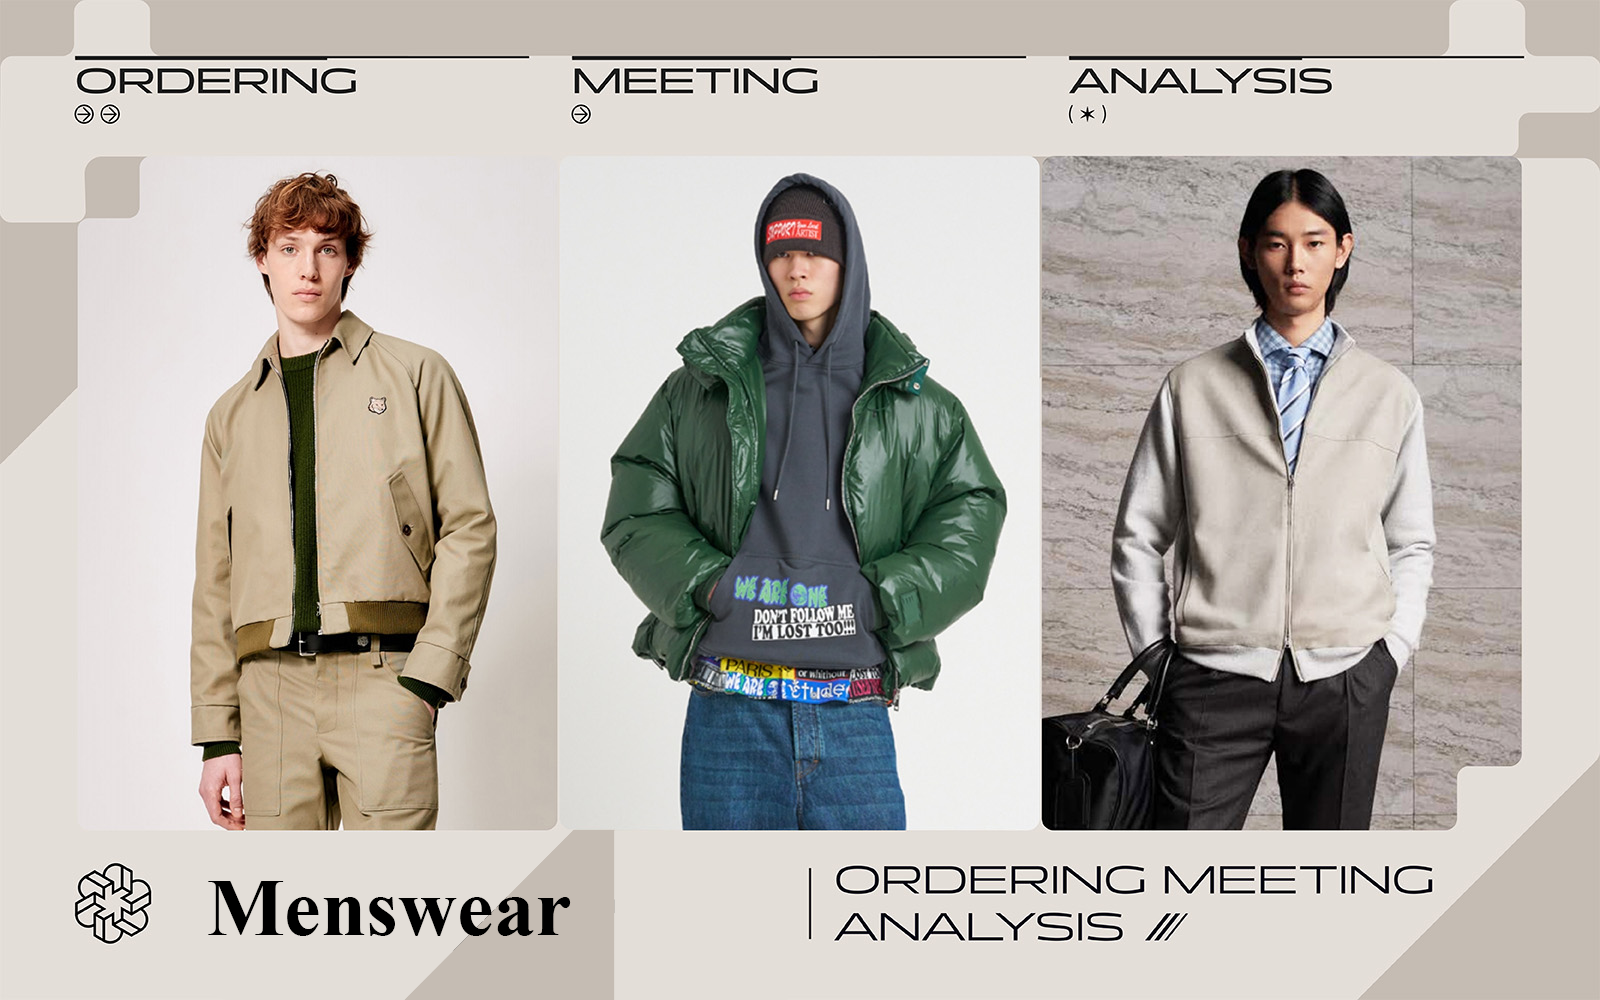 24/25 Autumn/Winter -- The Comprehensive Analysis of Menswear Ordering Meeting